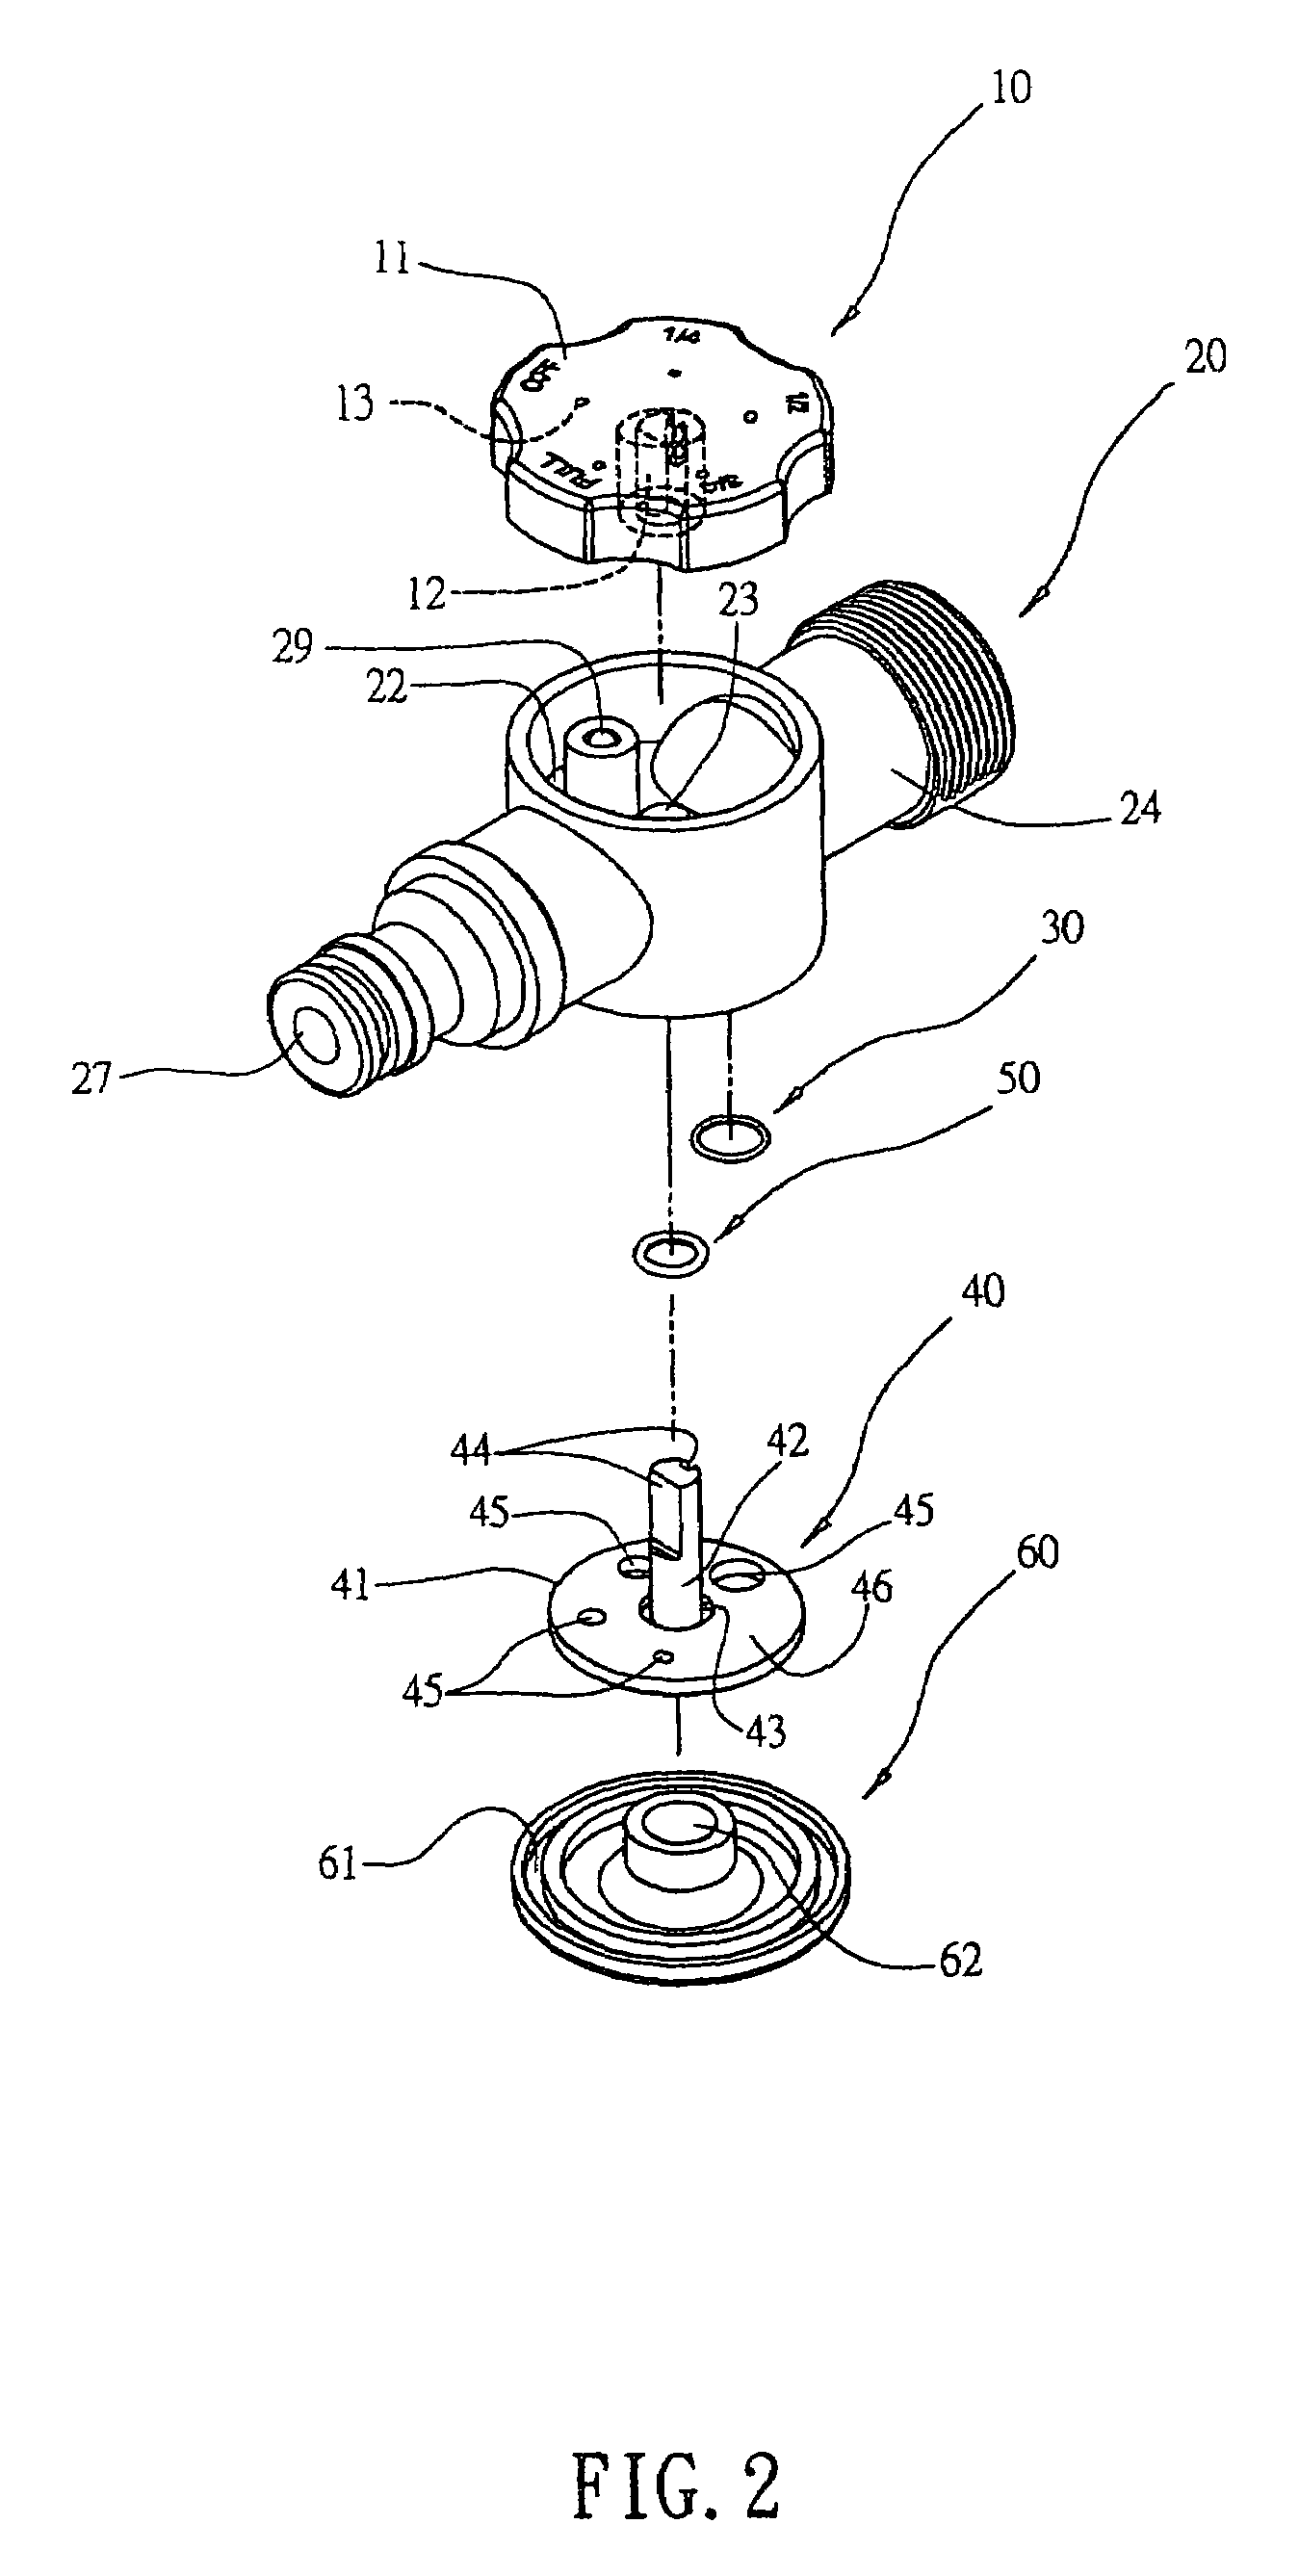 Flow control valve for gardening pipe